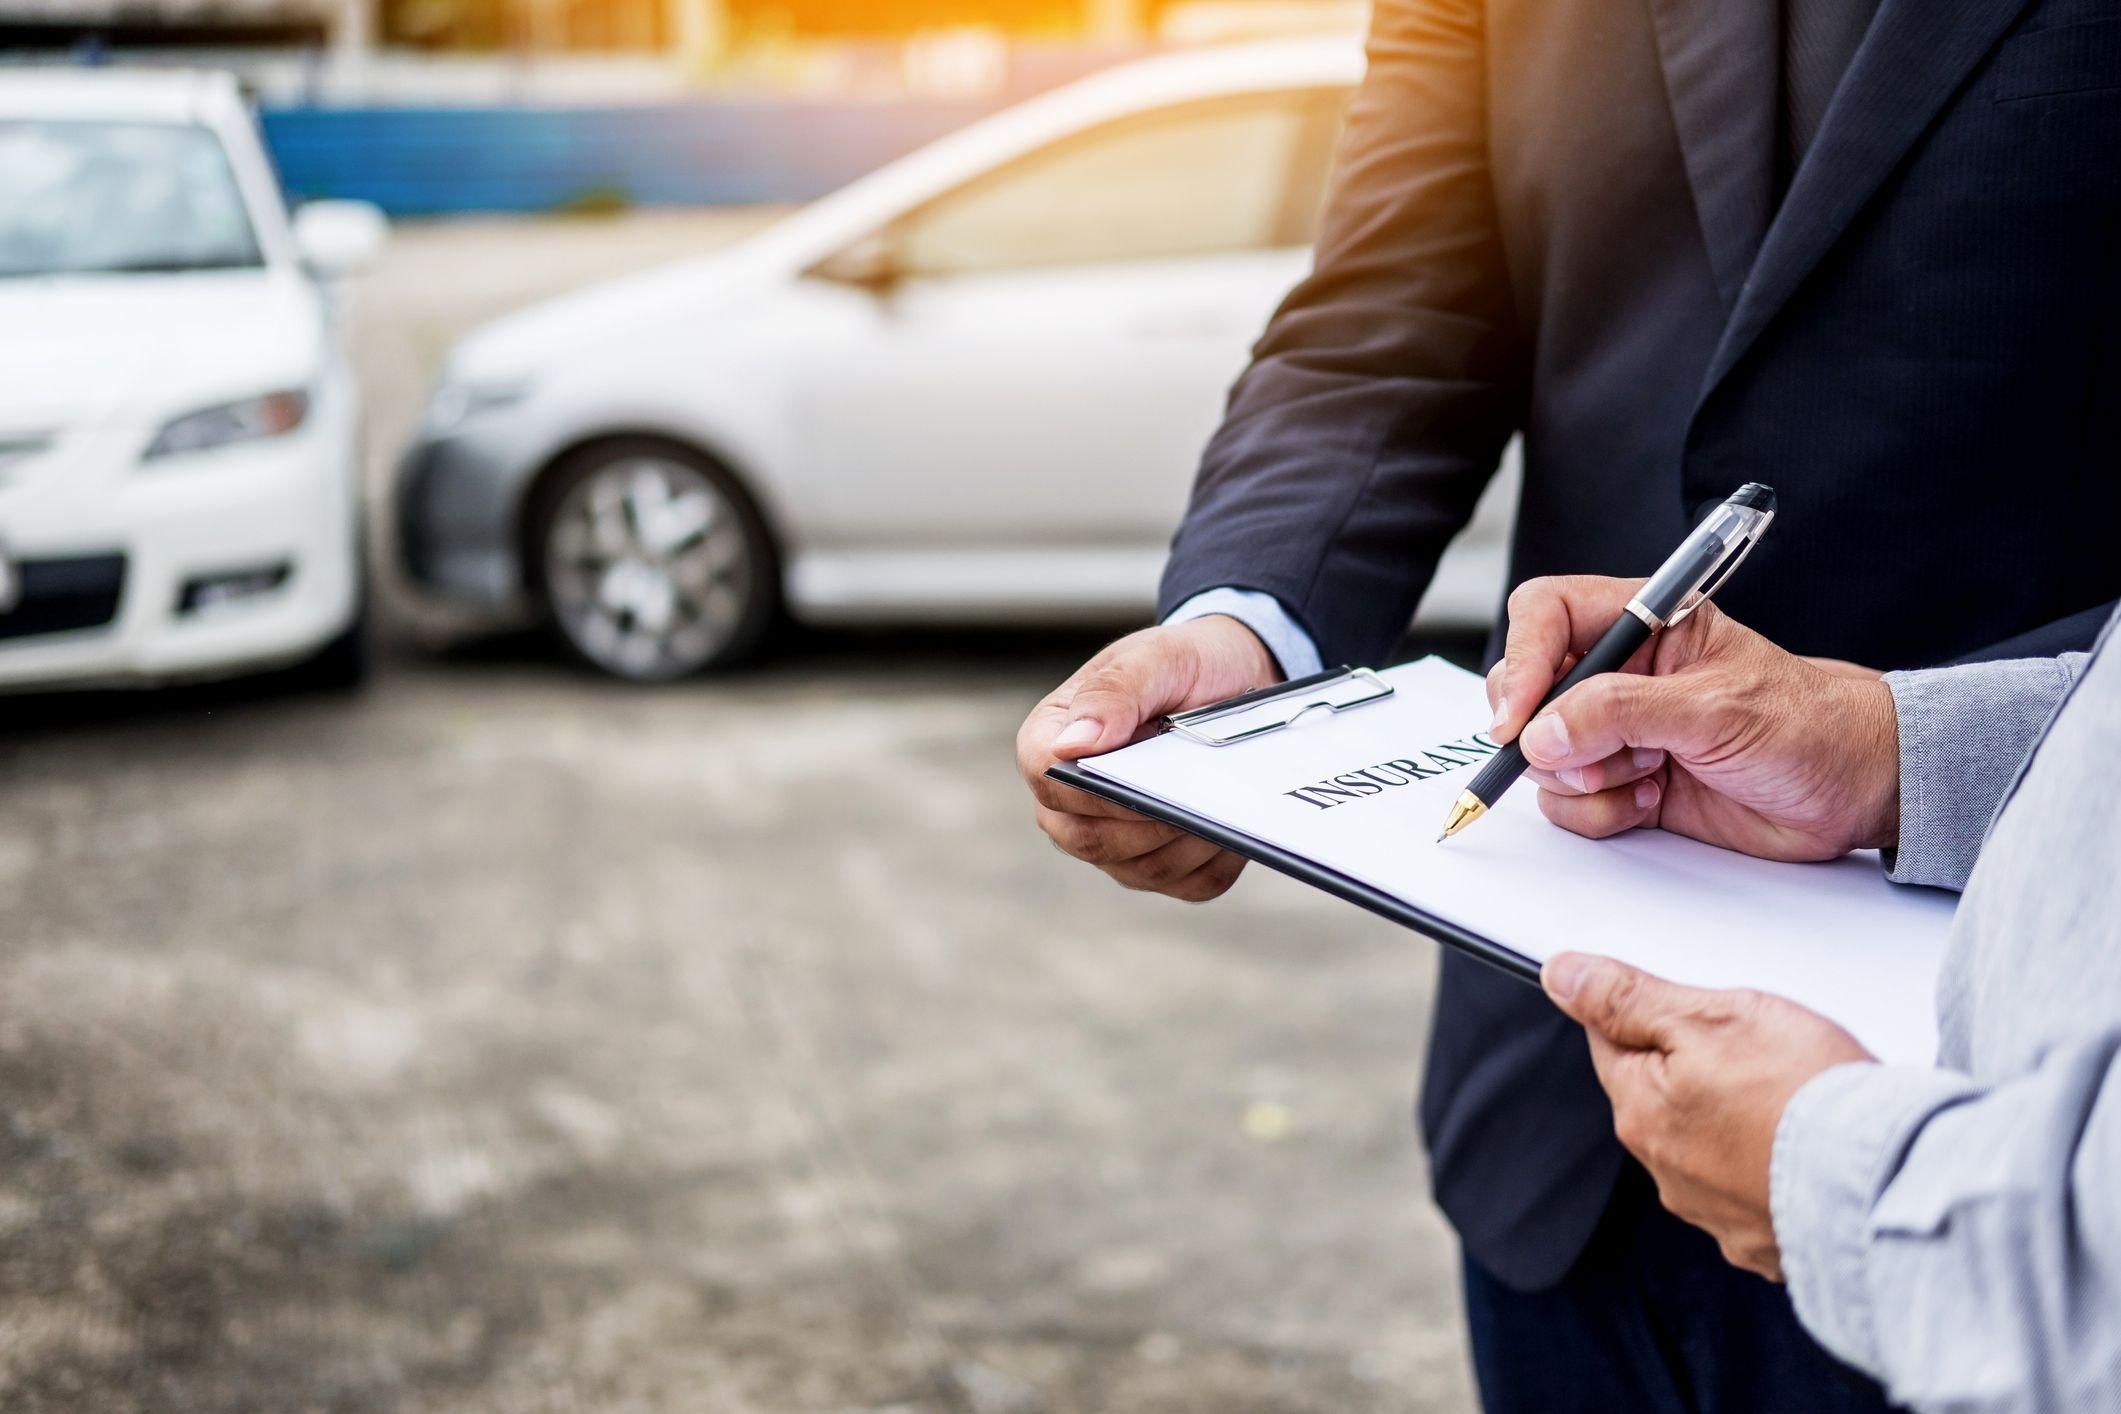 Cheap Car Insurance For The Unemployed: Protecting Your Assets In An Open Market